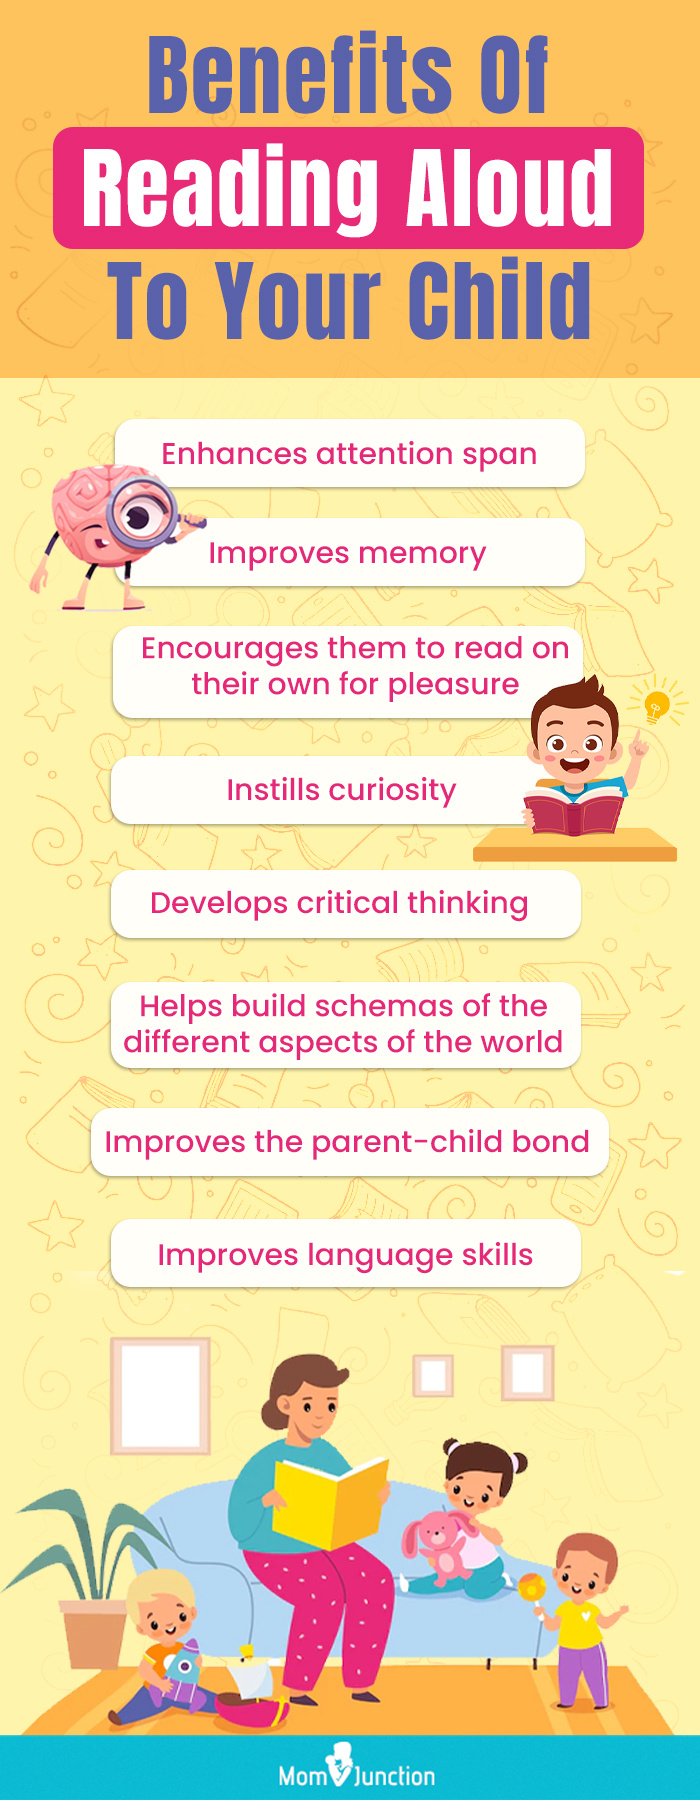 Benefits Of Reading Aloud To Your Child (Infographic)